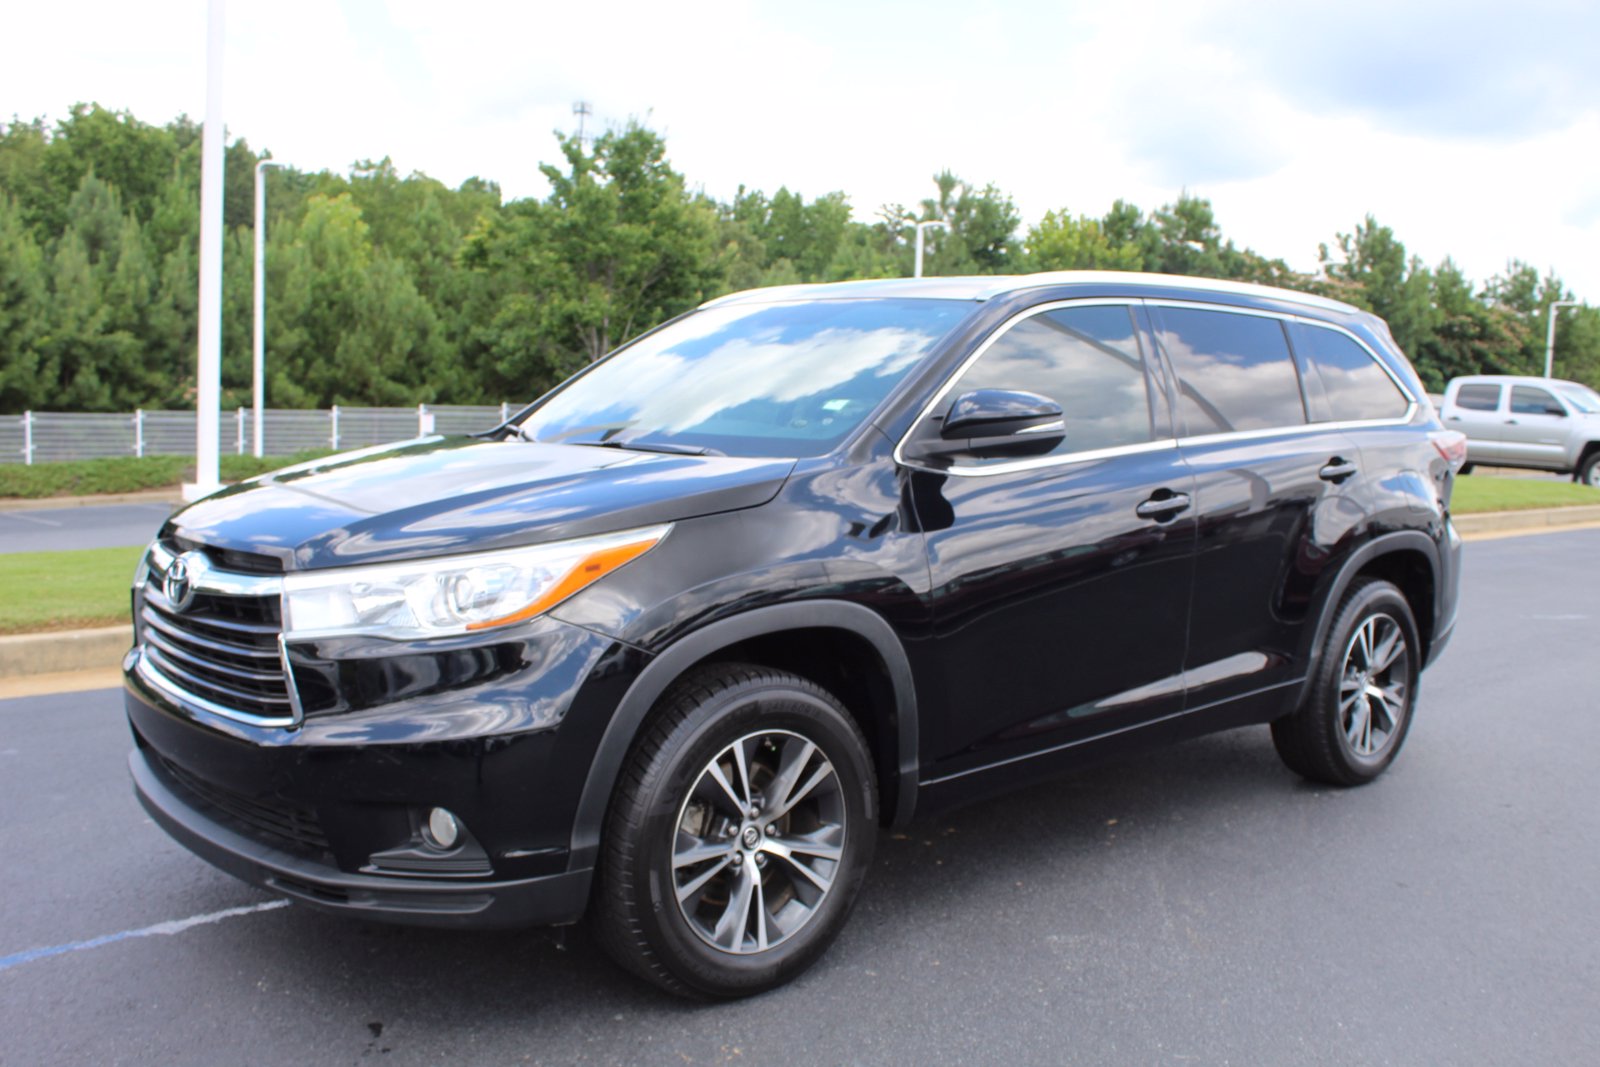 Pre-Owned 2016 Toyota Highlander XLE Sport Utility in Macon #C067494A